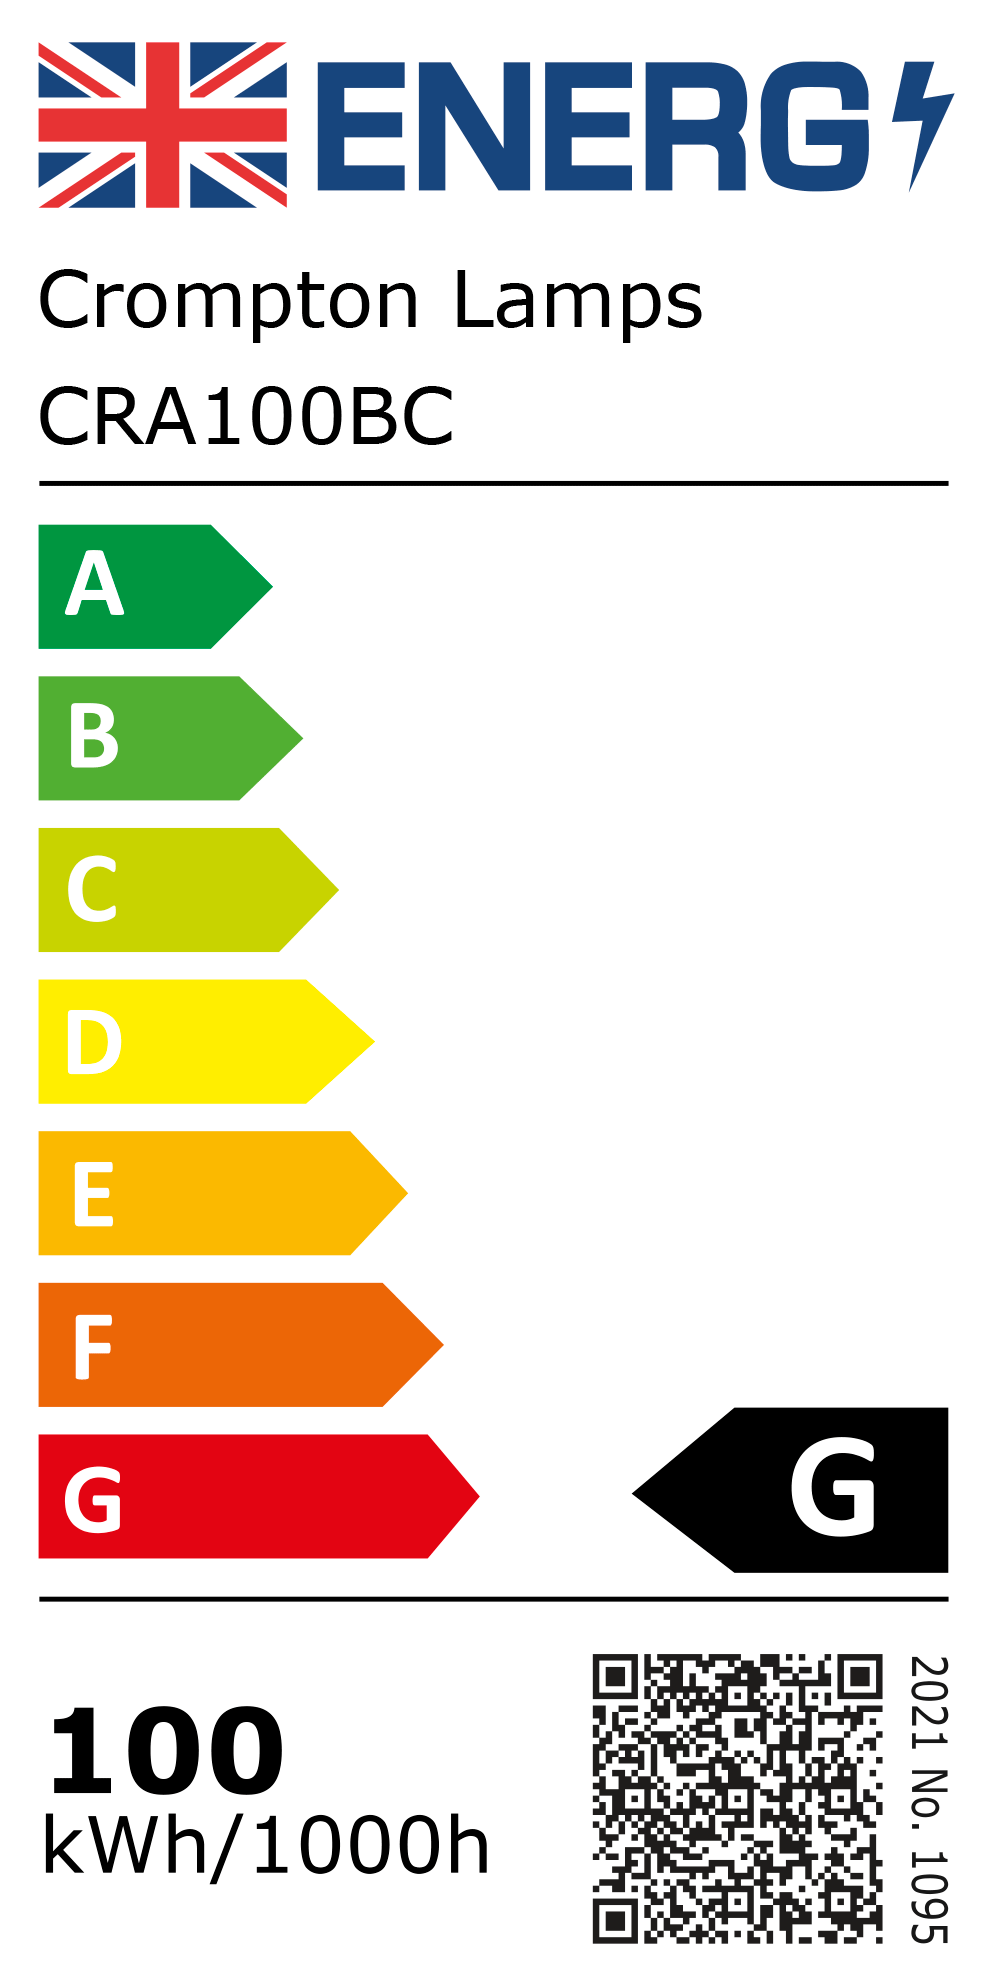 New 2021 Energy Rating Label: Stock Code CRA100BC